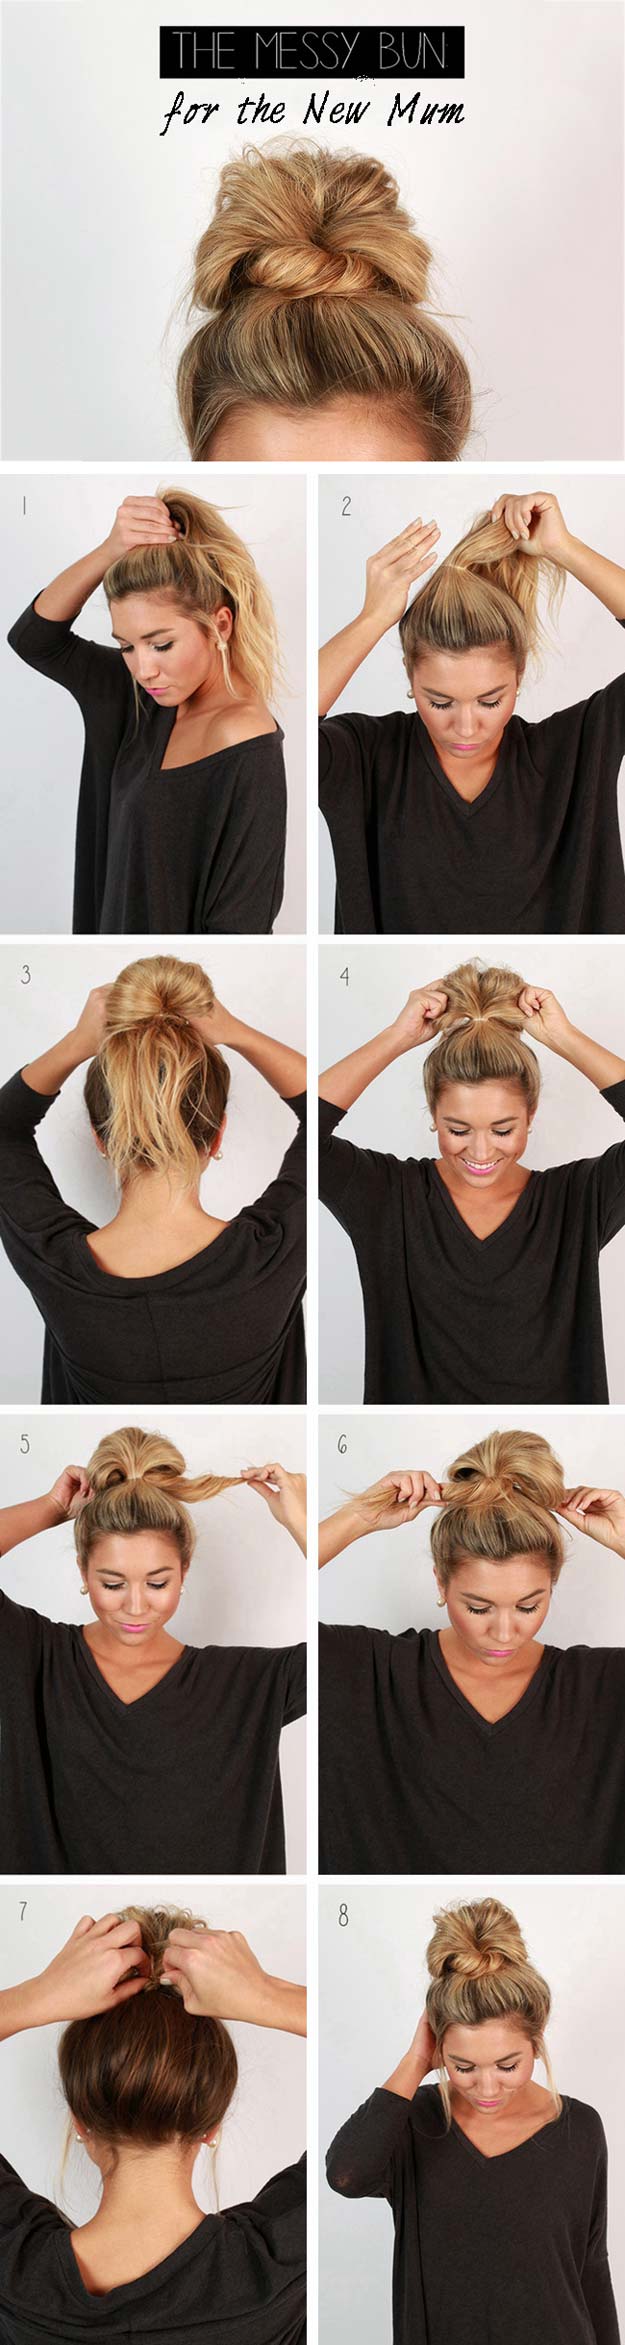 12-cute-and-super-easy-hairstyles-that-can-be-done-in-a-few-minutes